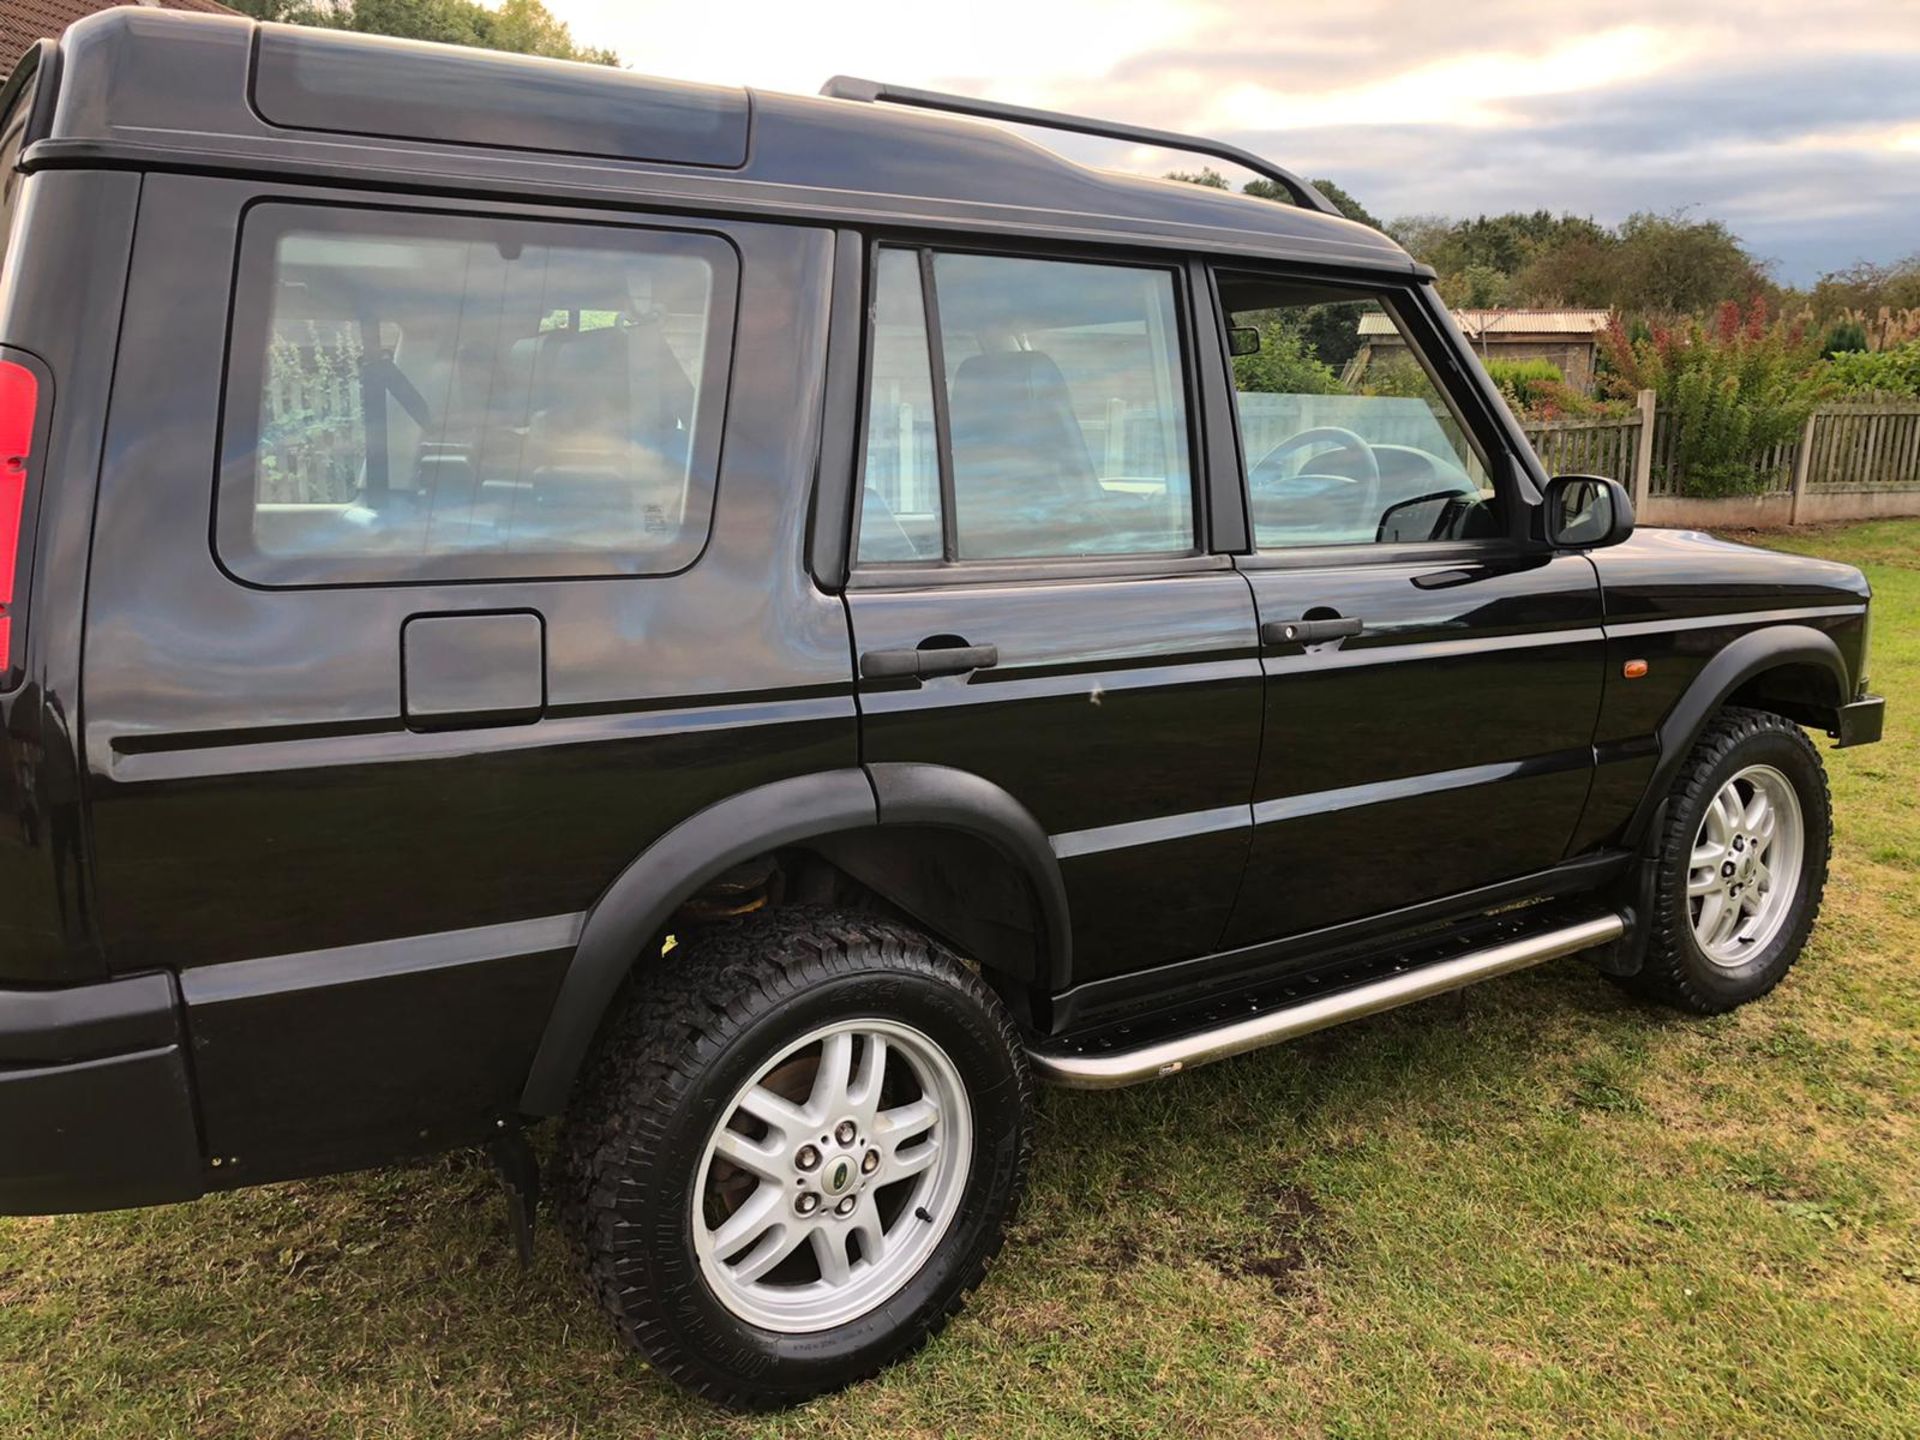 2003 LAND ROVER DISCOVERY TD5 GS AUTO 7 SEAT BLACK ESTATE, 132,559 MILES, 2.5 DIESEL ENGINE *NO VAT* - Image 7 of 15